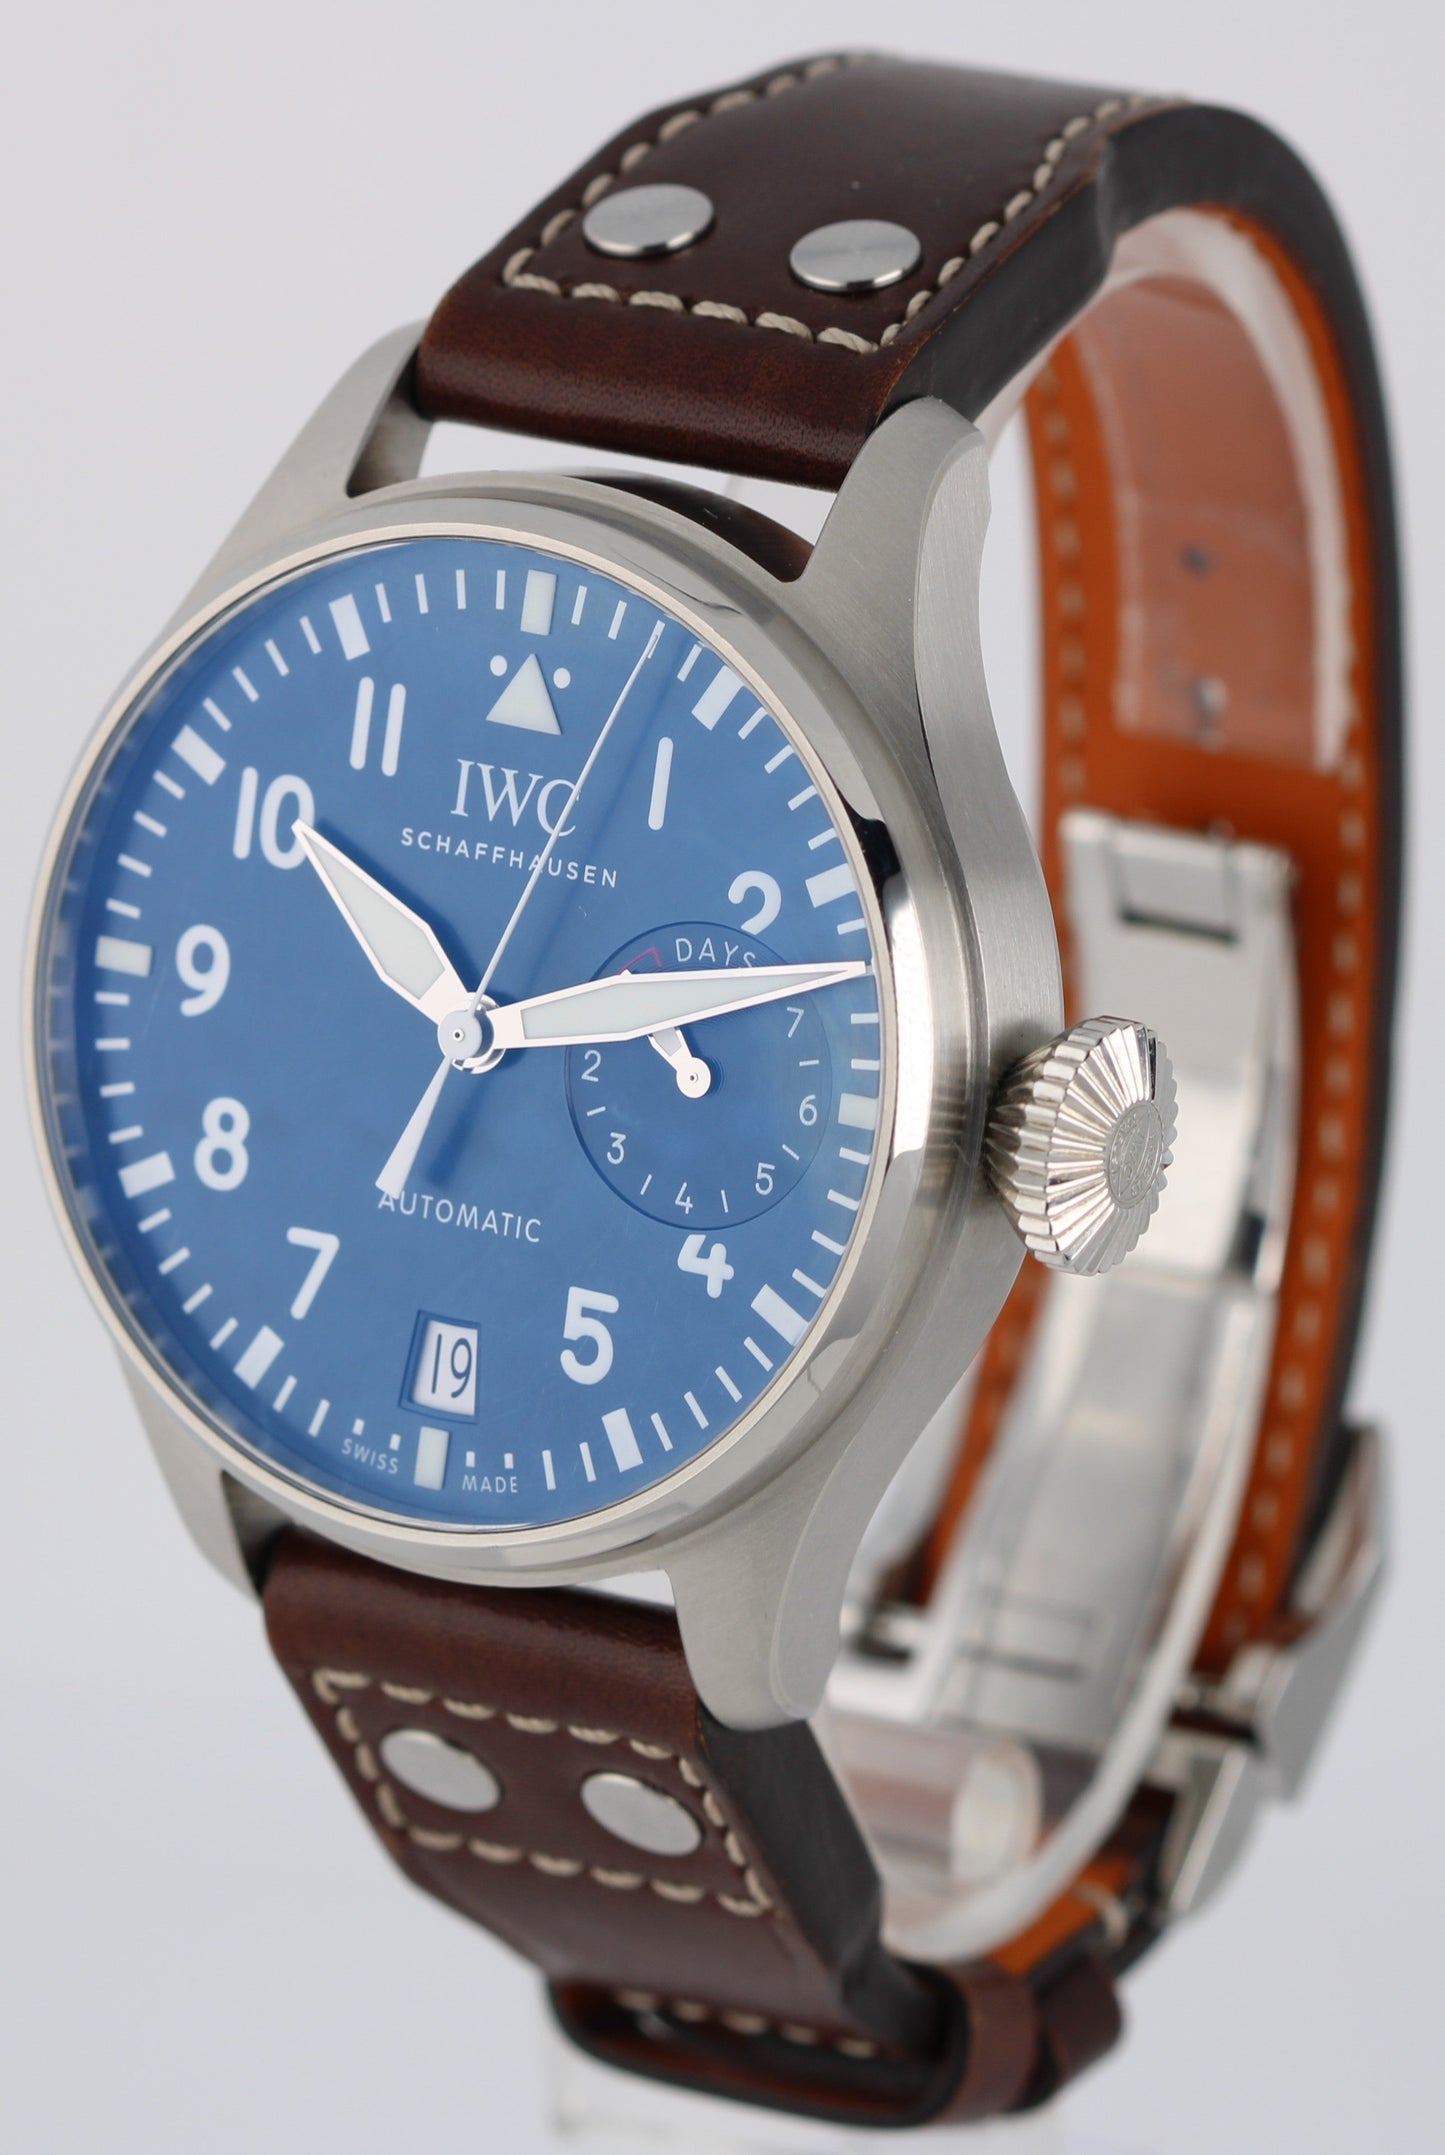 IWC Big Pilot Le Petit Prince PAPERS Steel Blue 46mm Leather IW500916 Watch BOX